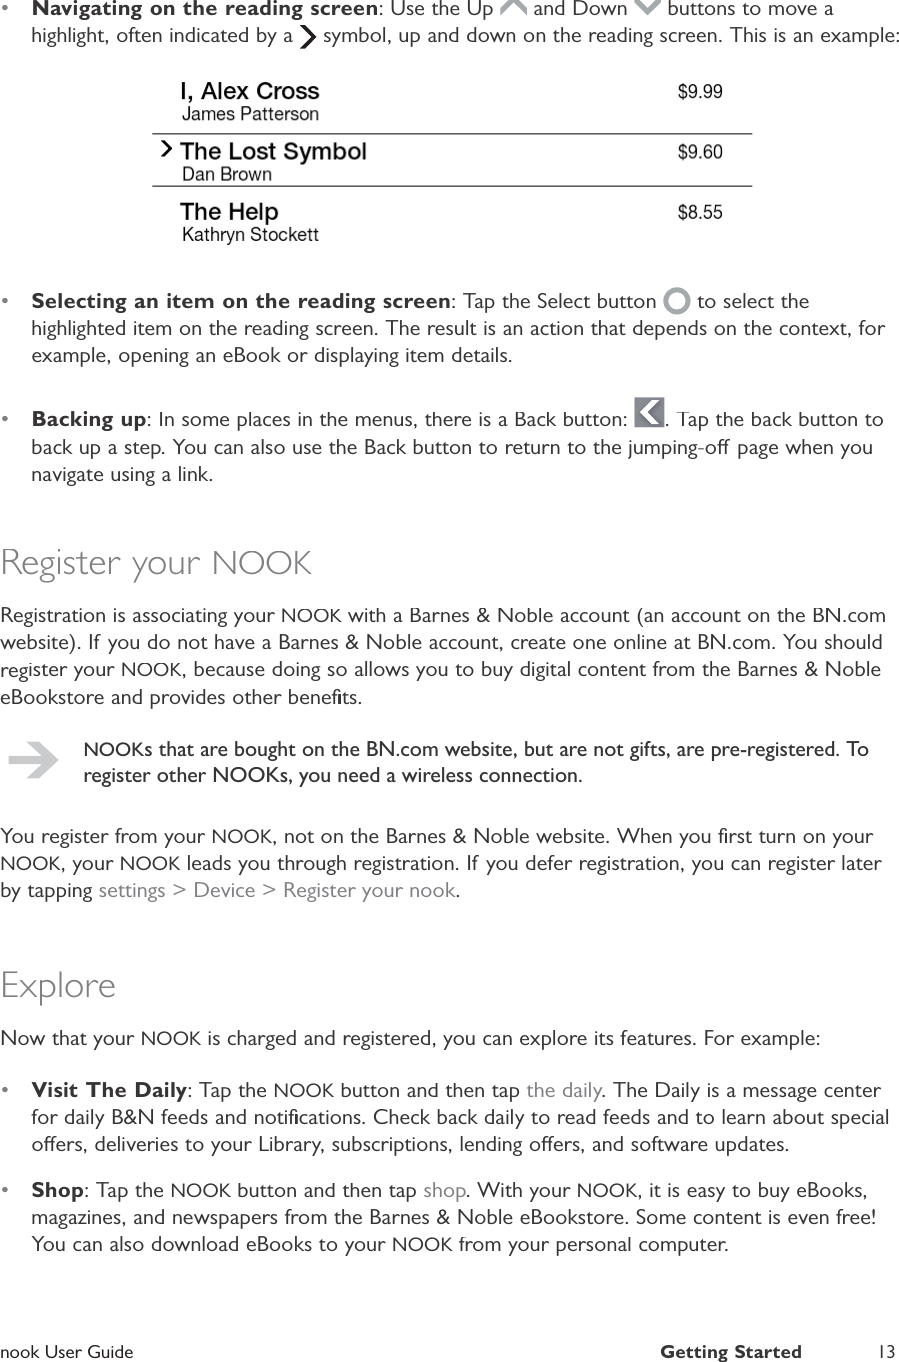 nook User GuideGetting Started 13•Navigating on the reading screen: Use the Up and Down  buttons to move ahighlight, often indicated by a  symbol, up and down on the reading screen. This is an example:•Selecting an item on the reading screen: Tap the Select button  to select thehighlighted item on the reading screen. The result is an action that depends on the context, for example, opening an eBook or displaying item details.•Backing up: In some places in the menus, there is a Back button: . Tap the back button toback up a step. You can also use the Back button to return to the jumping-o page when younavigate using a link.Register your NOOKRegistration is associating your NOOK with a Barnes &amp; Noble account (an account on the BN.comKwebsite). If you do not have a Barnes &amp; Noble account, create one online at BN.com. You shouldregister your NOOK, because doing so allows you to buy digital content from the Barnes &amp; NobleeBookstore and provides other beneﬁts.NOOKs that are bought on the BN.com website, but are not gifts, are pre-registered. Toregister other NOOKs, you need a wireless connection.You register from your NOOK, not on the Barnes &amp; Noble website. When you ﬁrst turn on your NOOK, your NOOK leads you through registration. If you defer registration, you can register later Kby tapping settings &gt; Device &gt; Register your nook.ExploreNow that your NOOK is charged and registered, you can explore its features. For example:K•Visit The Daily: Tap theNOOK button and then tapKthe daily. The Daily is a message center for daily B&amp;N feeds and notiﬁcations. Check back daily to read feeds and to learn about specialoers, deliveries to your Library, subscriptions, lending oers, and software updates.•Shop: Tap theNOOK button and then tapKshop. With your NOOK, it is easy to buy eBooks,magazines, and newspapers from the Barnes &amp; Noble eBookstore. Some content is even free!You can also download eBooks to your NOOK from your personal computer.K